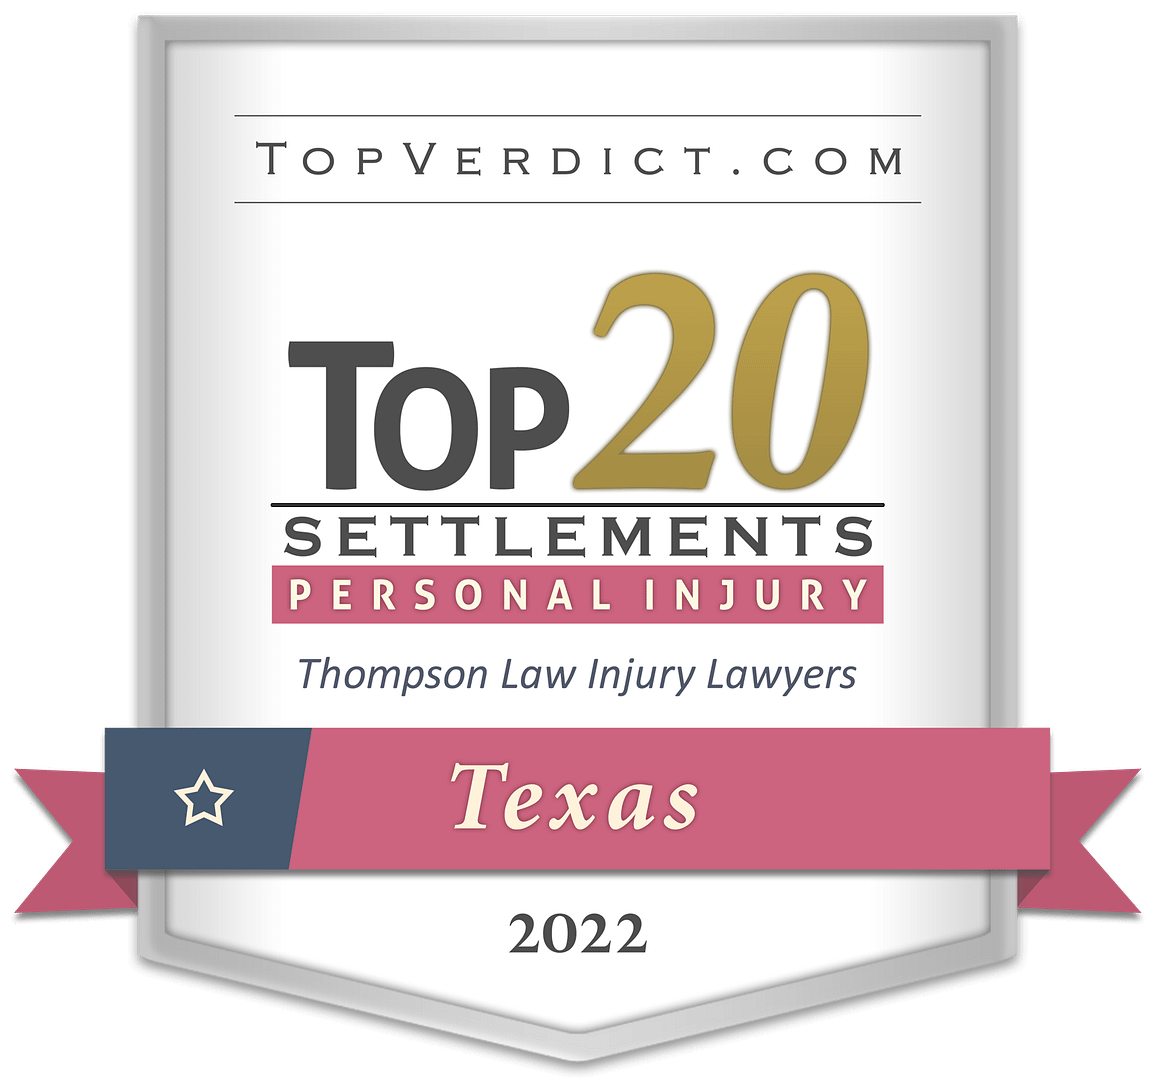 TopVerdict Top 20 personal injury settlements in Texas 2022 badge - San Marcos Personal Injury Law Firm